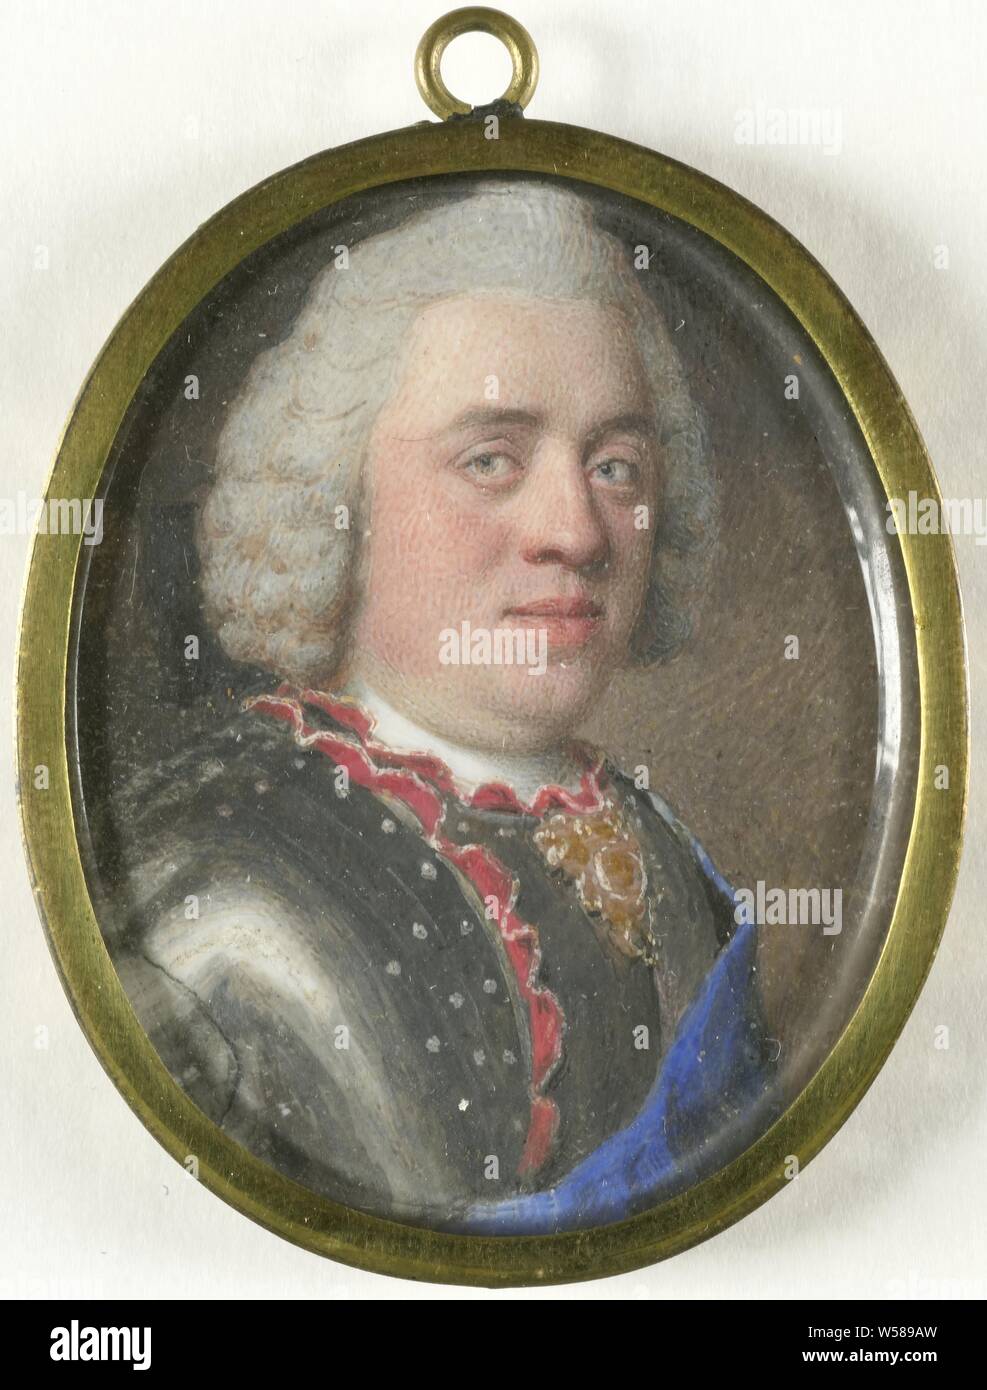 Portrait of Stadholder William IV (1711-51), Prince of Orange Nassau, Portrait of William IV (1711-51), Prince of Orange Nassau Bust, to the right, in armor. Part of the collection of portrait miniatures, Willem IV (Prince of Orange-Nassau), Jean-Etienne Liotard (attributed to), Holland, 1755 - 1760, ivory, metal, glass, h 5 cm × w 4 cm h 5.7 cm × w 4.2 cm × d 0.5 cm Stock Photo